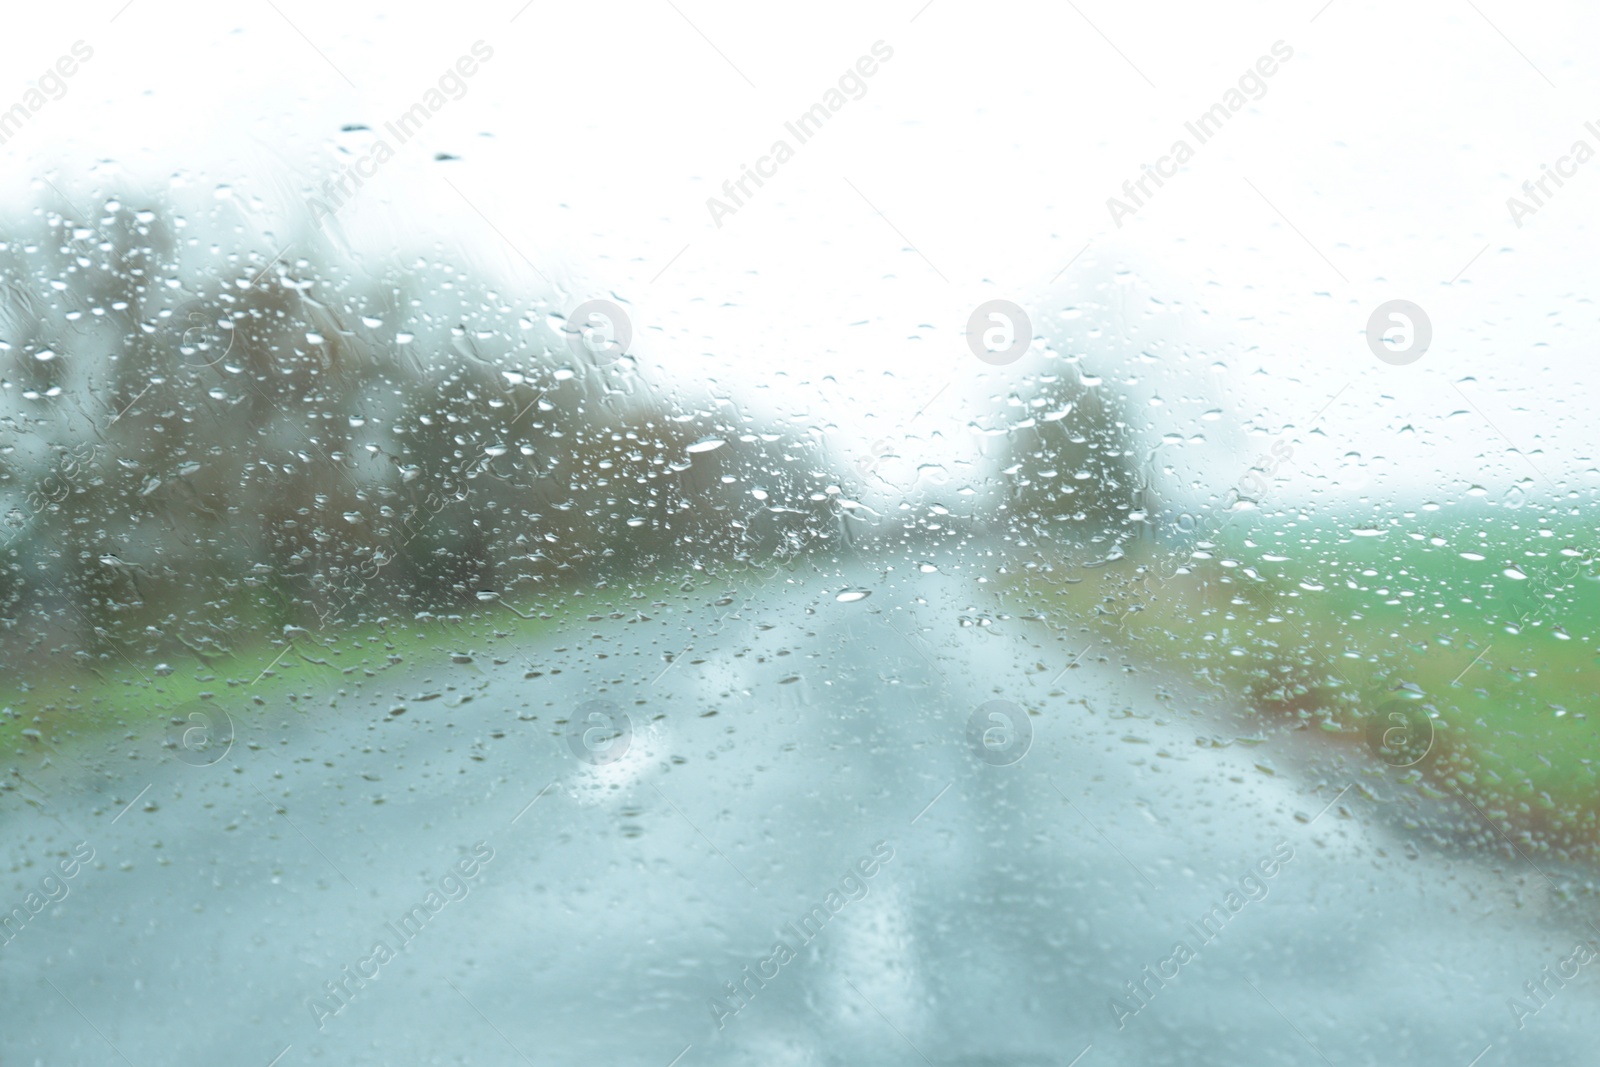 Photo of Blurred view of suburban road through wet car window. Rainy weather